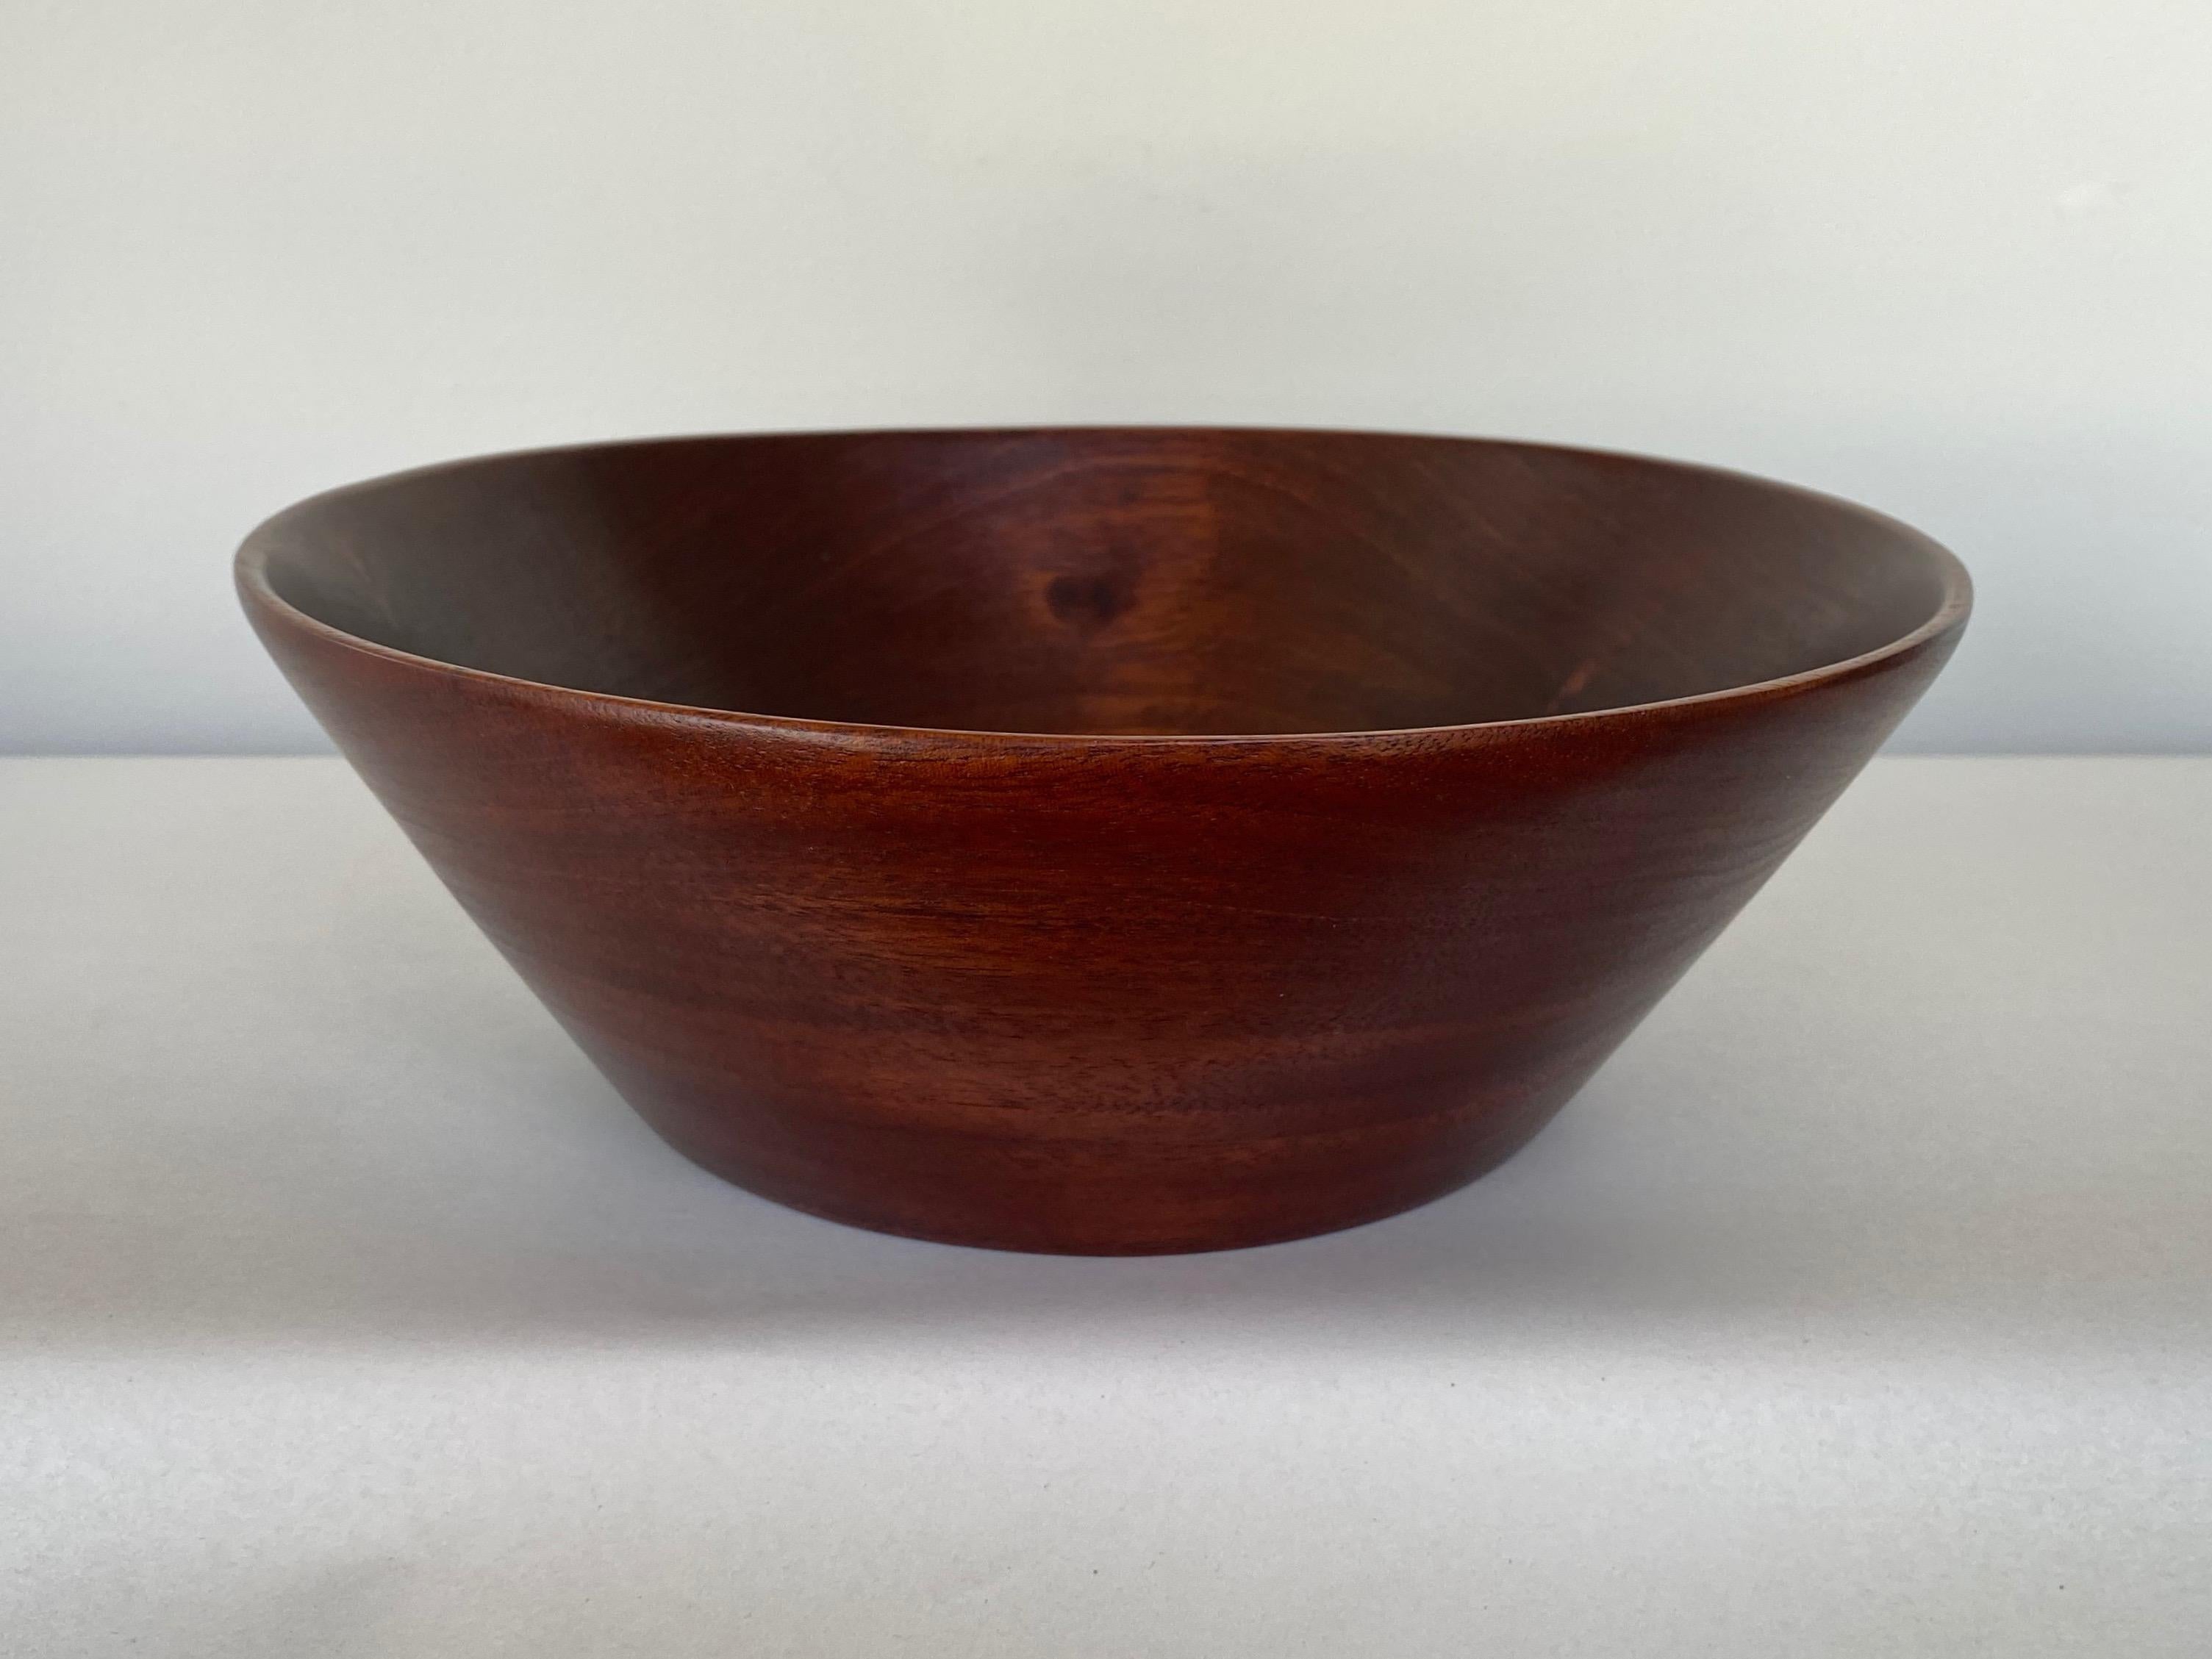 A 1960s mahogany turned wood bowl by important and influential American master woodturner Bob Stocksdale.

Deceptively simple lathe-turned solid mahogany form with straight exterior sides, smoothly curved interior, and thinly formed rim displays